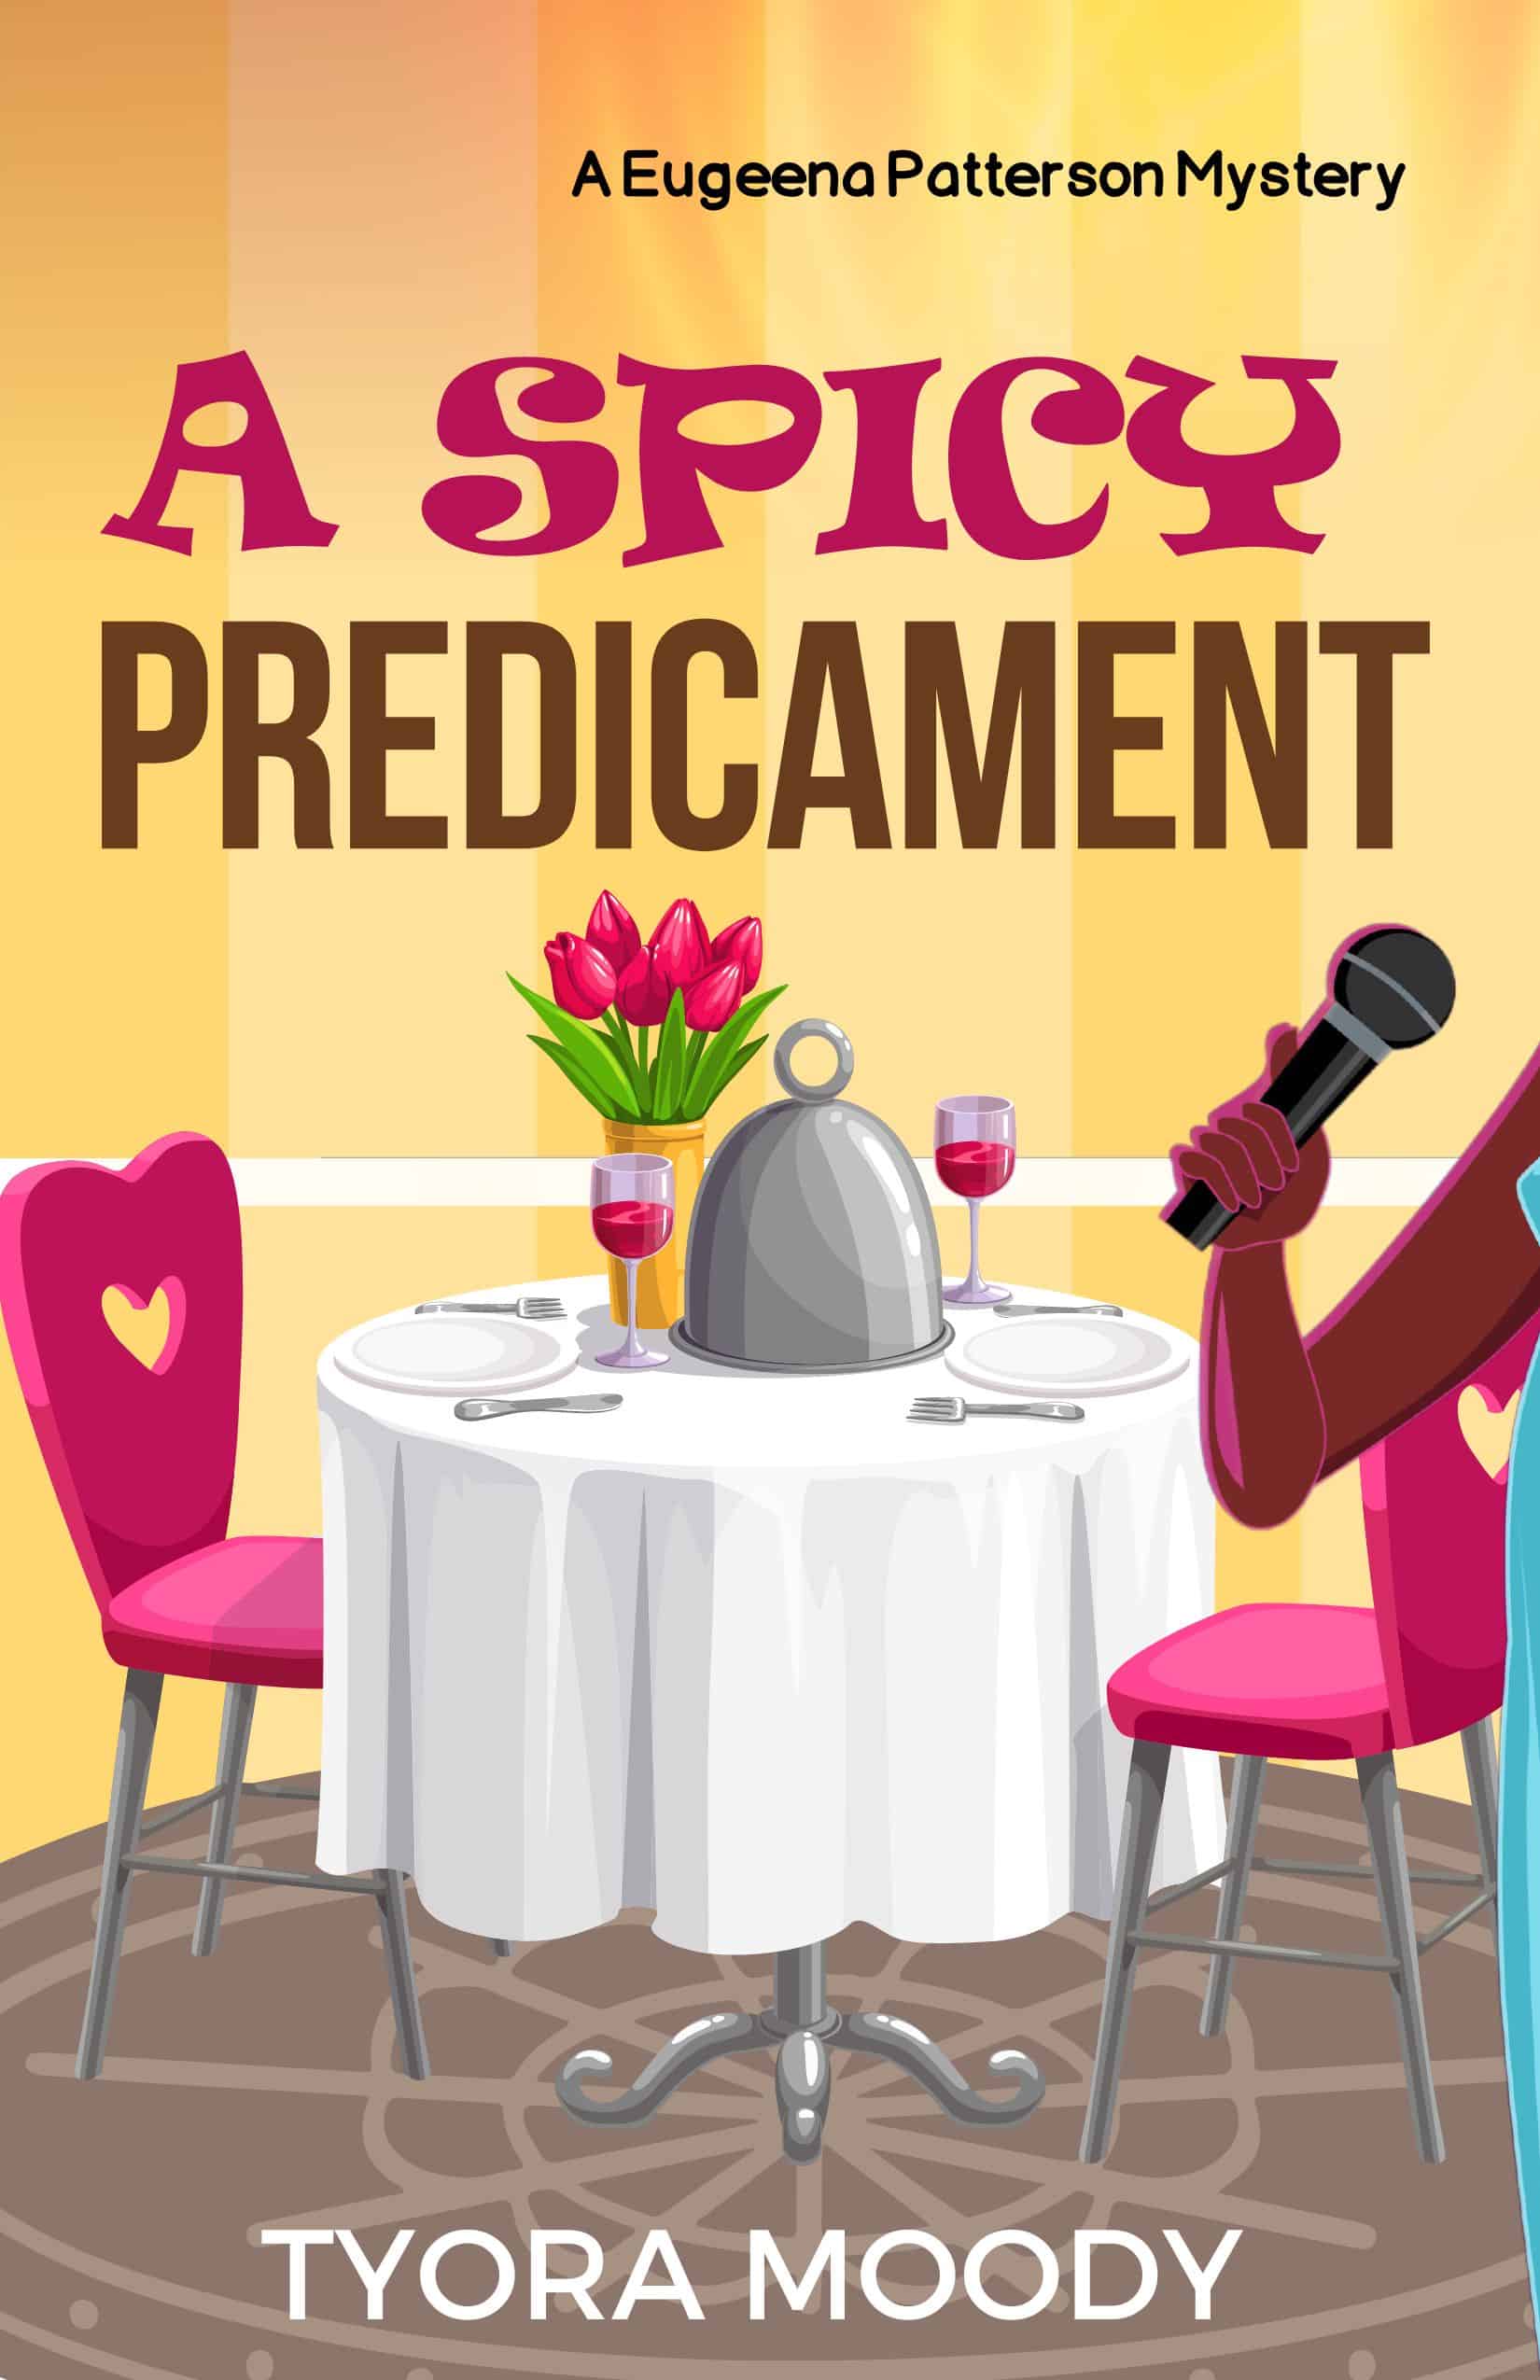 A Spicy Predicament, Eugeena Patterson Mysteries, Book 6